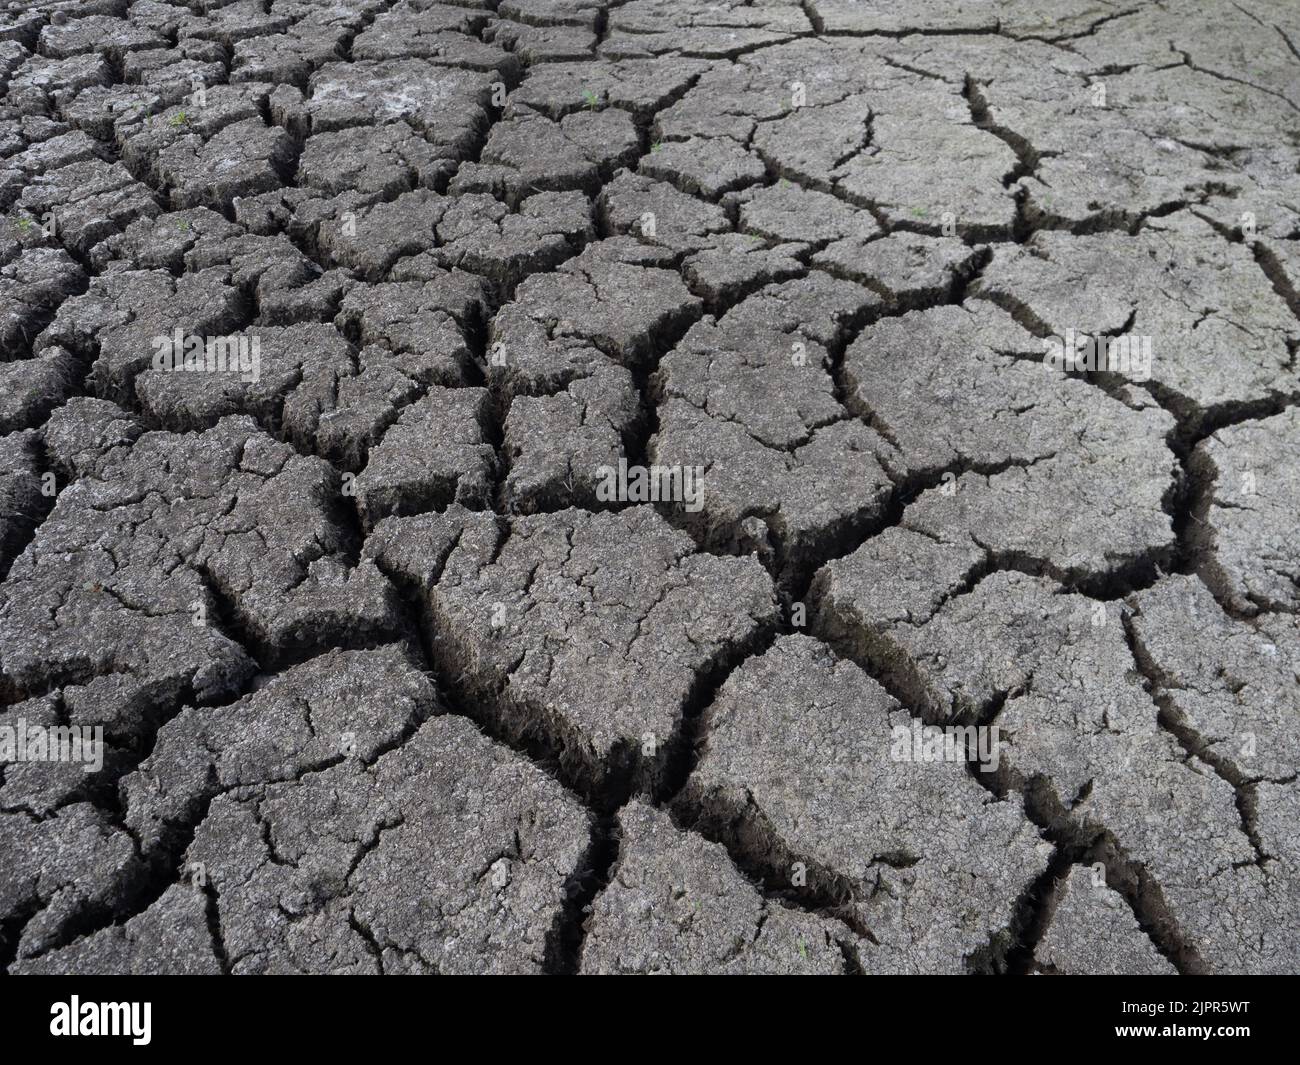 Deep clefts in parched, dried lake bed photographed from a low angle. Stock Photo